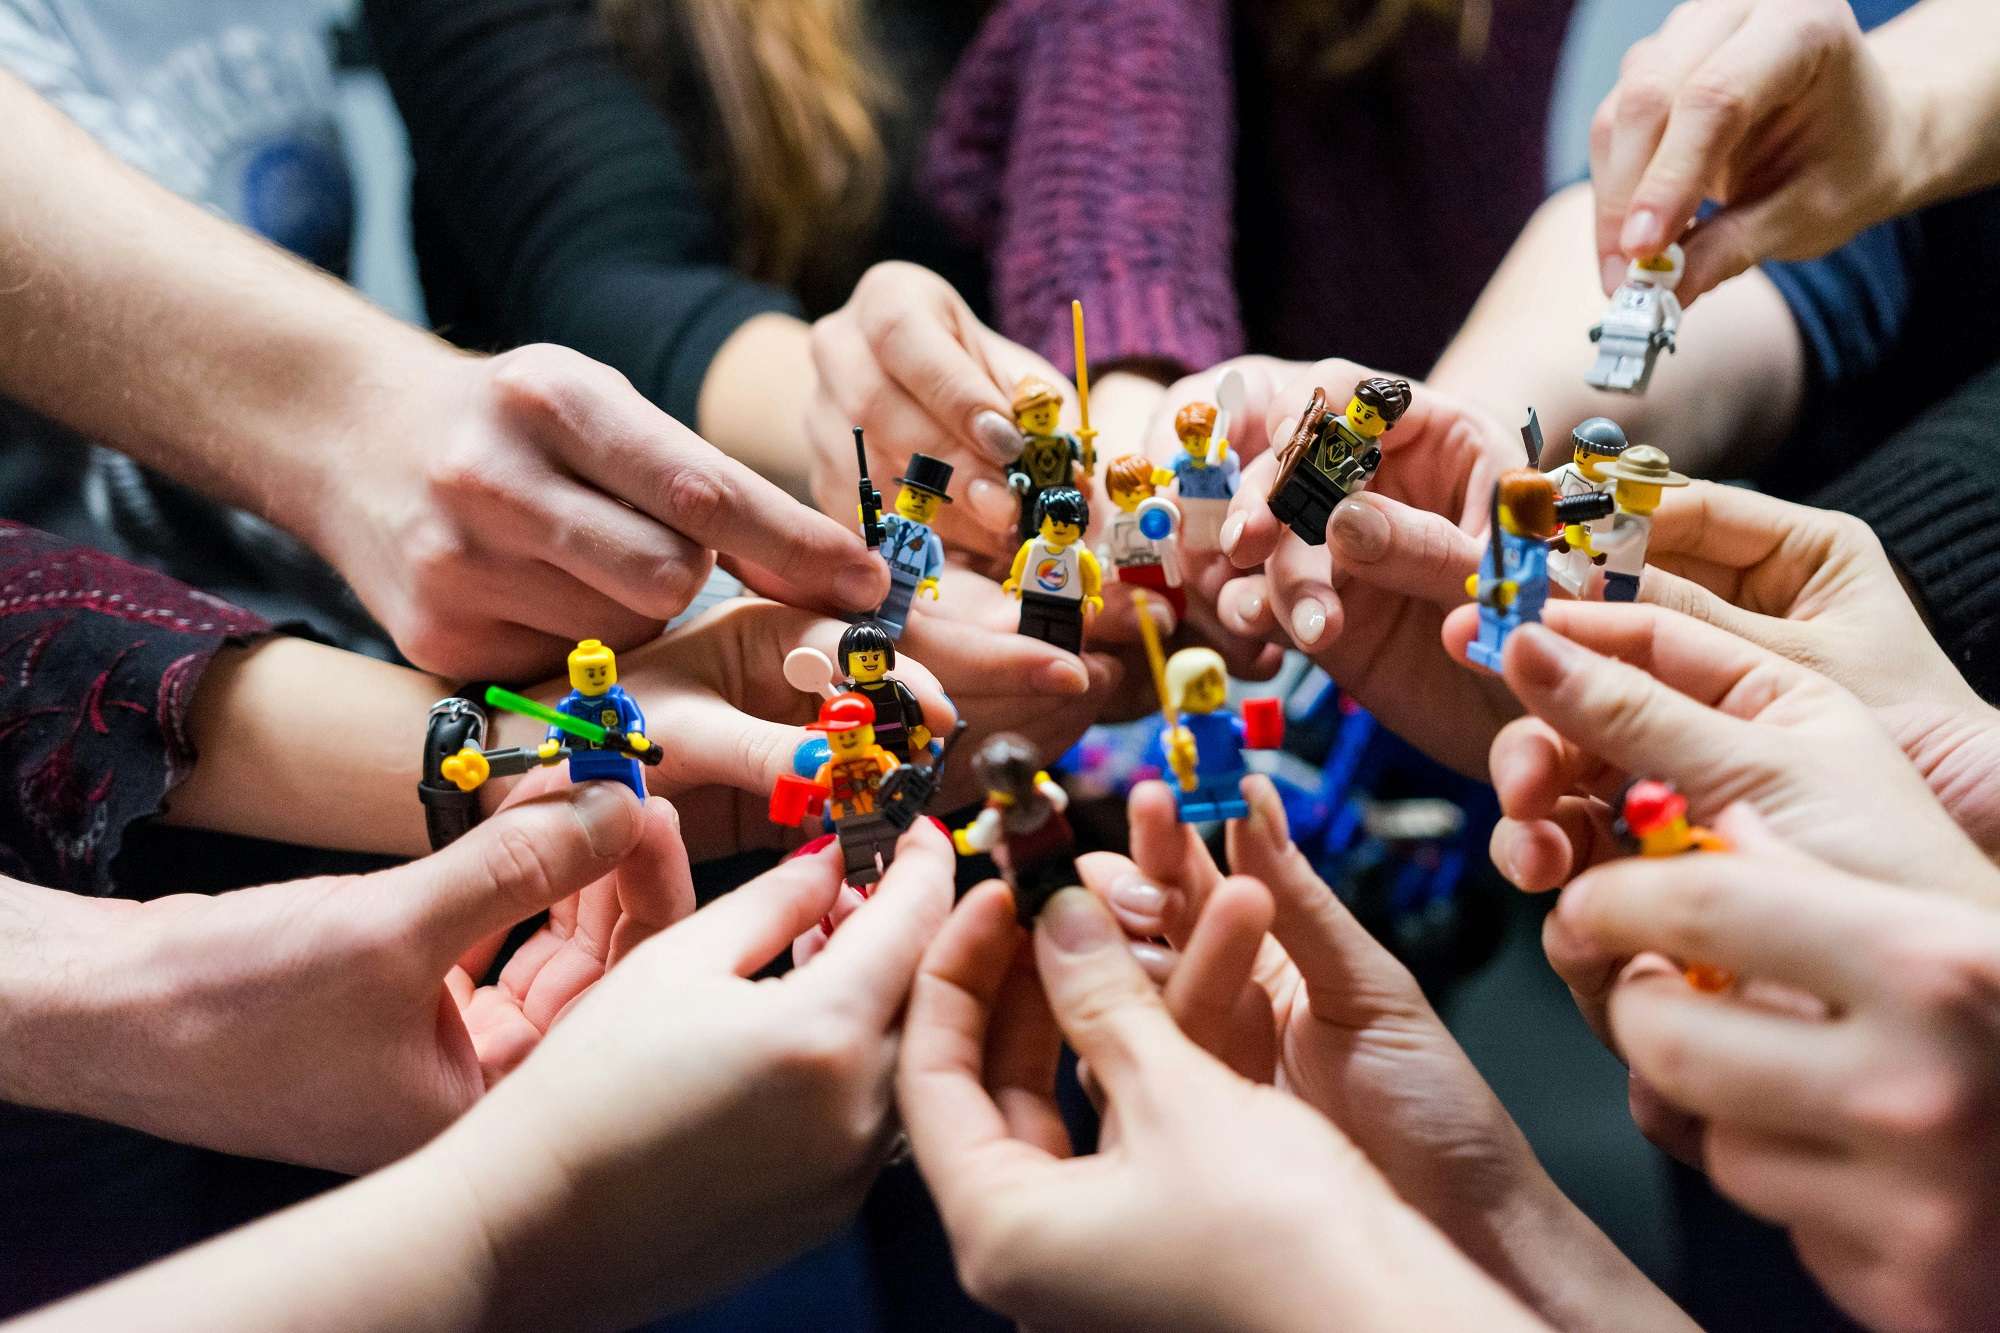 Lego toys in hands